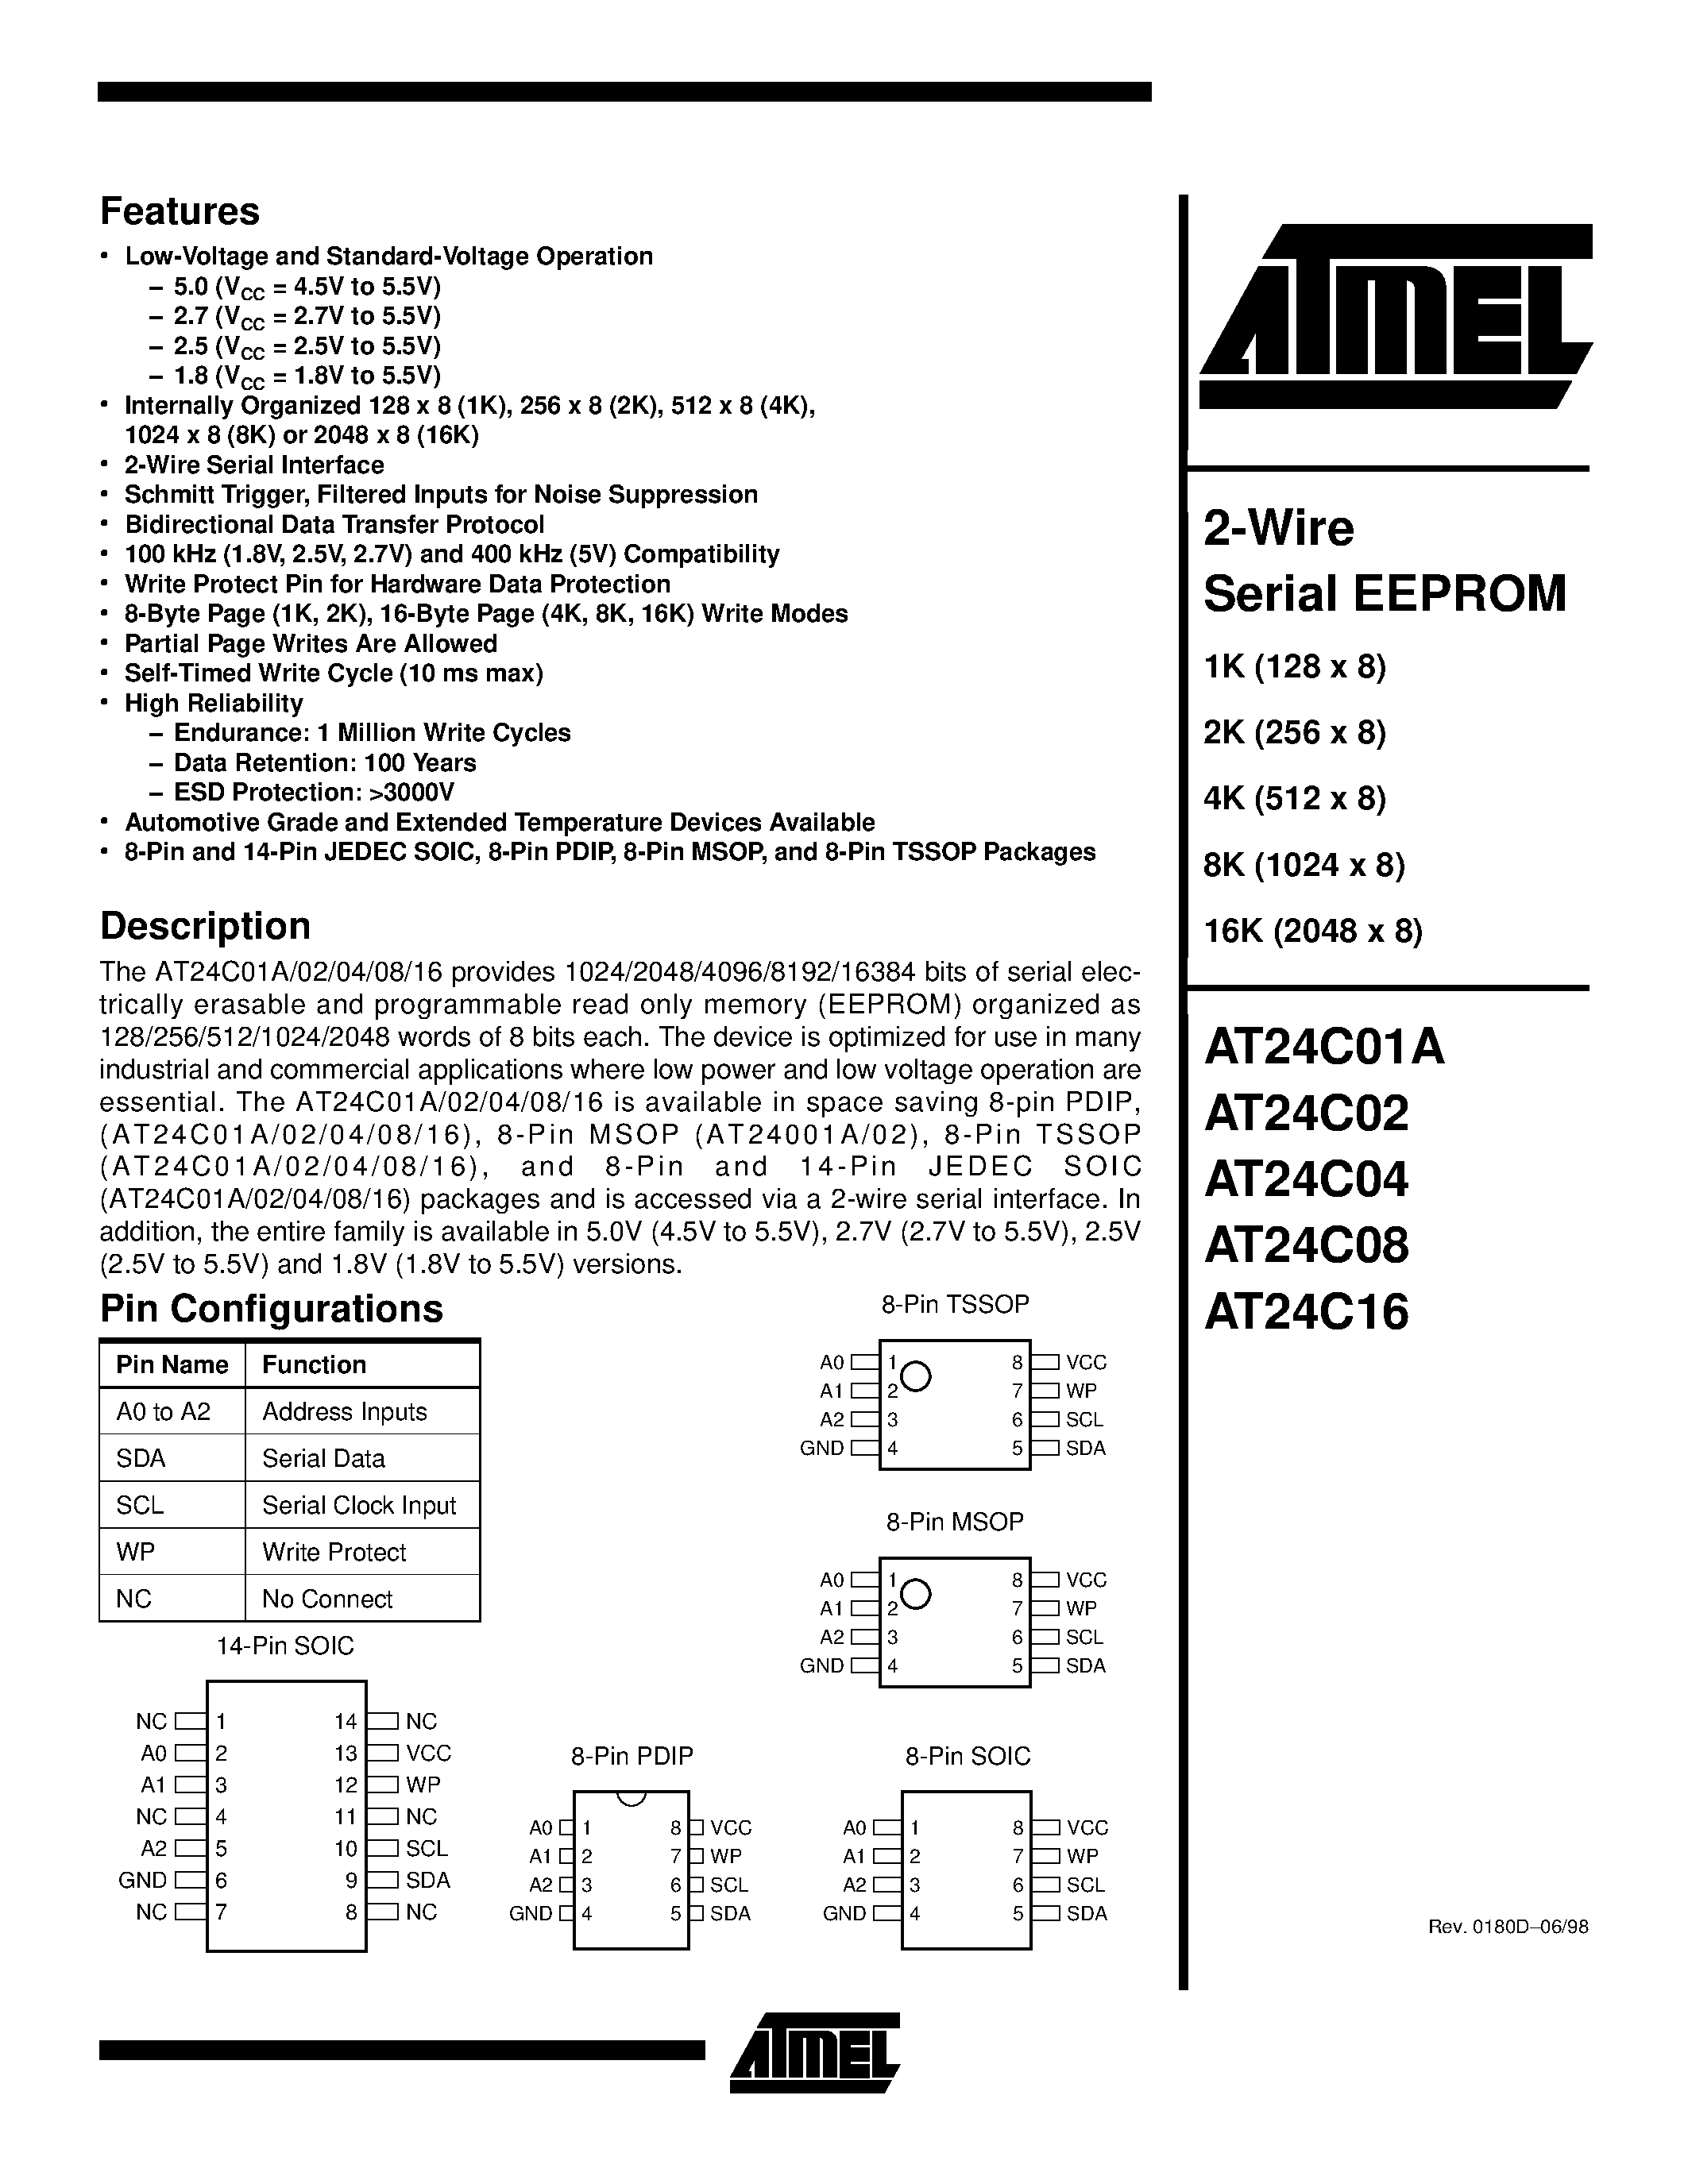 Datasheet AT24C08-10PC-2.7 - 2-Wire Serial EEPROM page 1